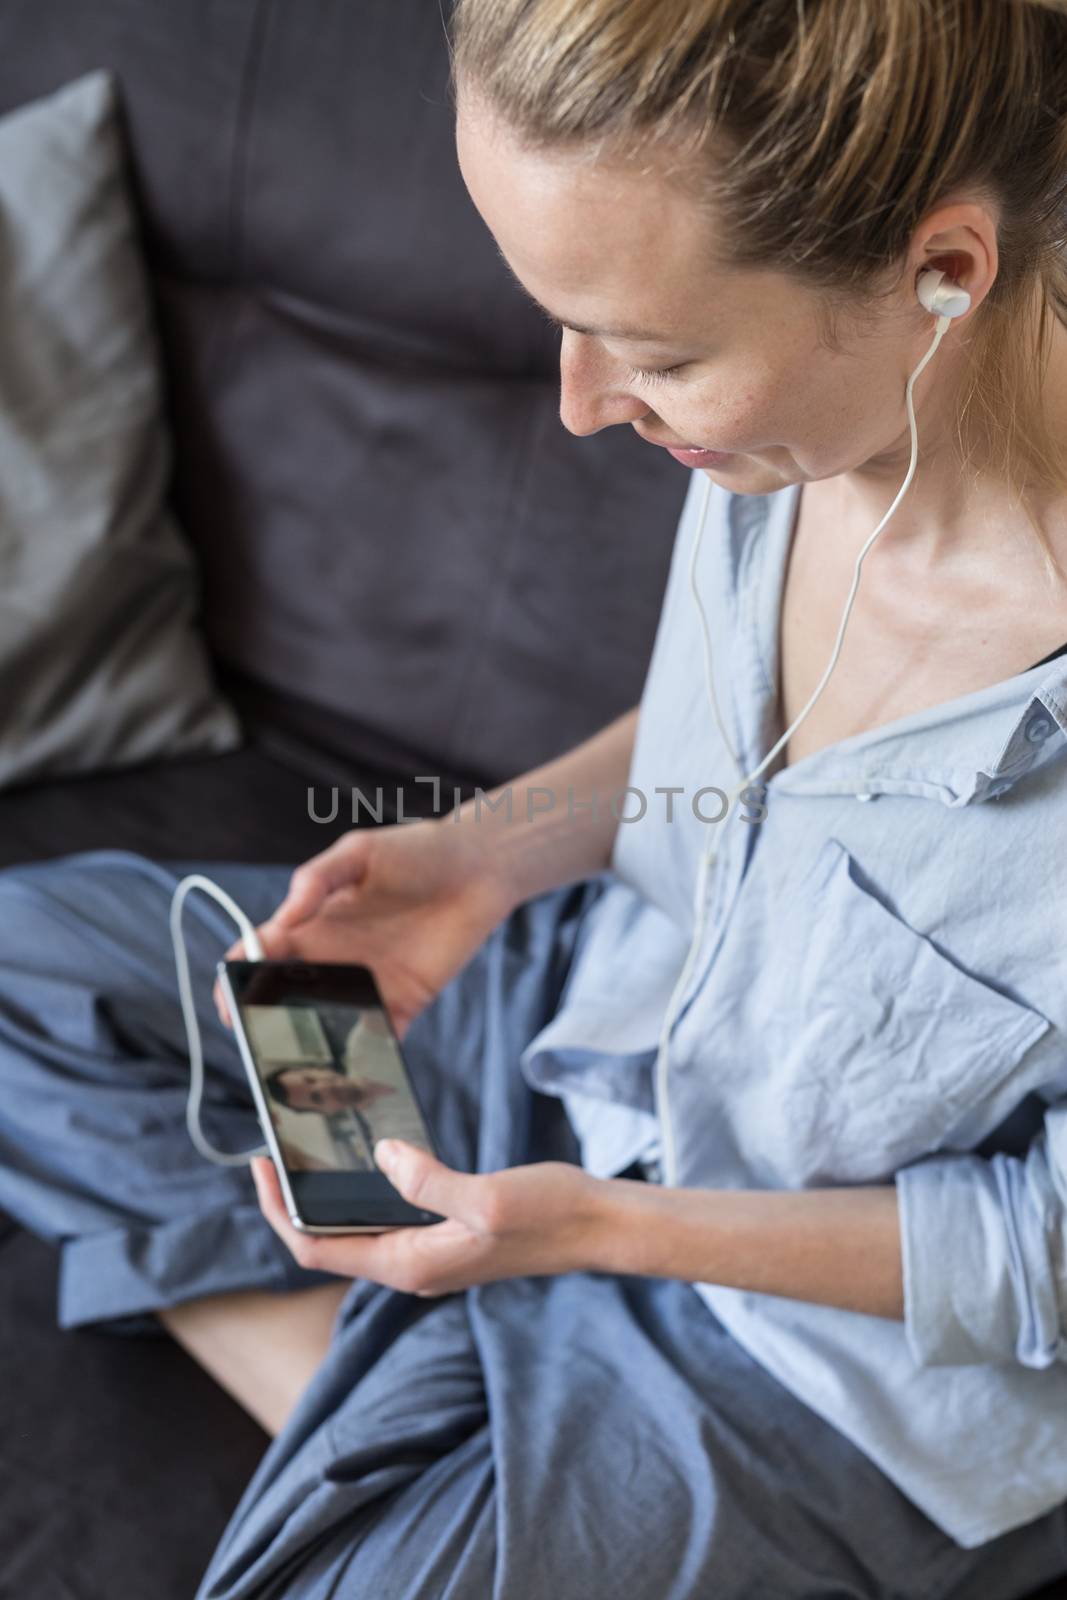 Stay at home, social distancing lifestyle. Woman at home relaxing on sofa couch using social media on phone for video chatting with her loved ones during corona virus pandemic.